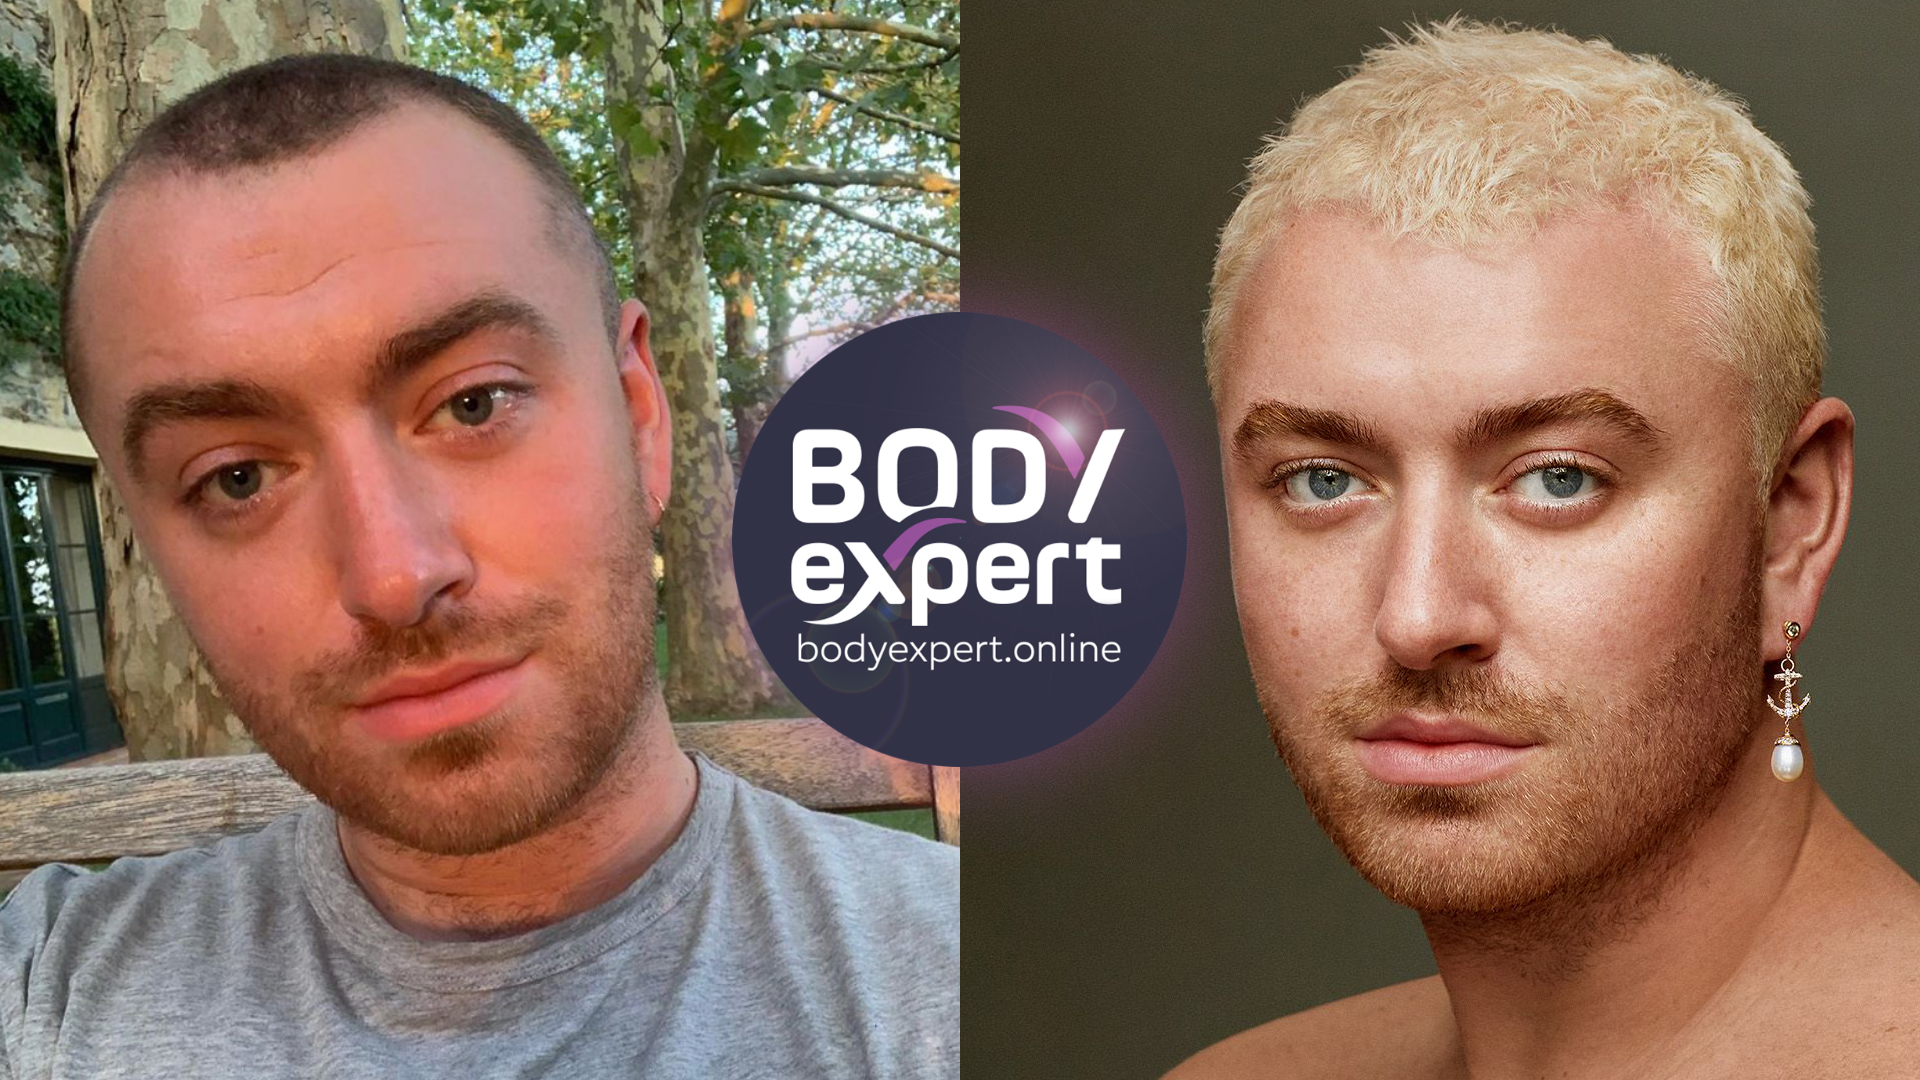 has Sam Smith had a hair transplant? Yes at the end of 2020